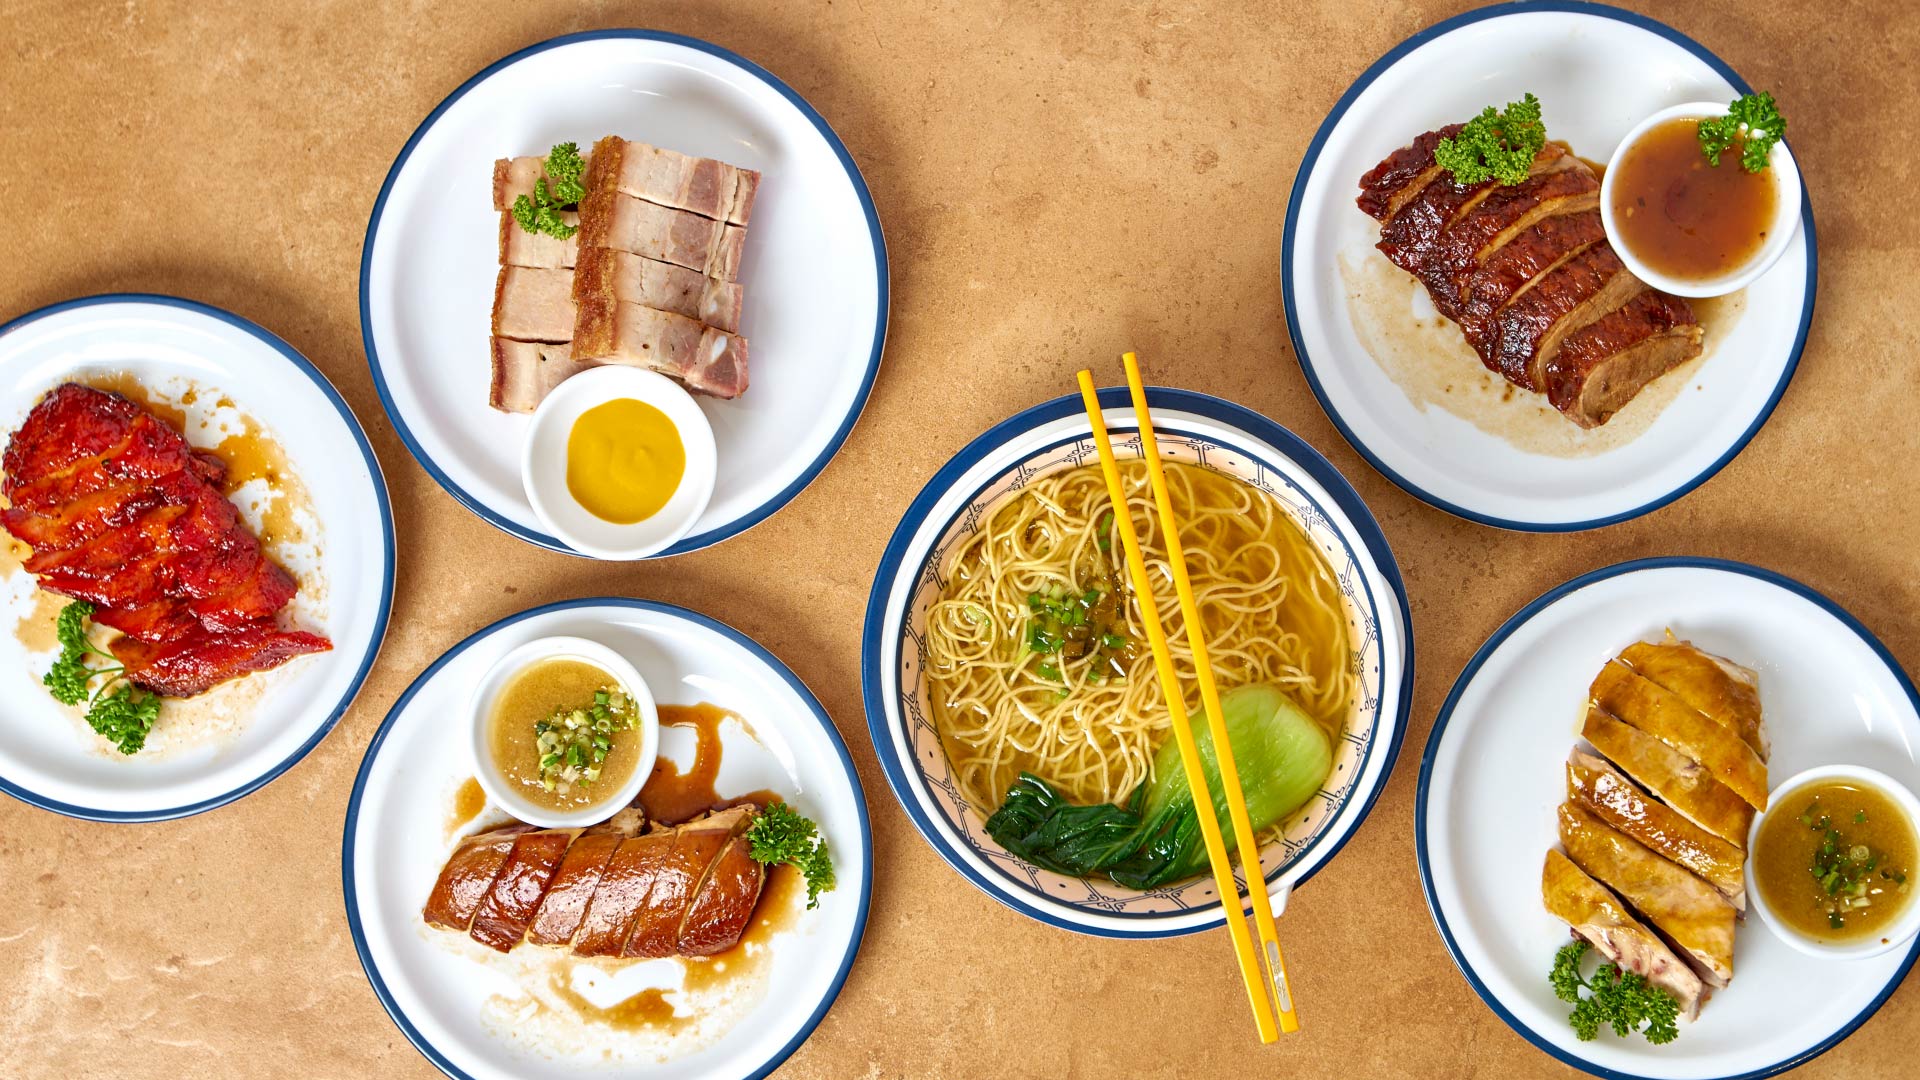 Flatlay photography and styling for Hong Kong roasts restaurant Roasts Kitchen Company